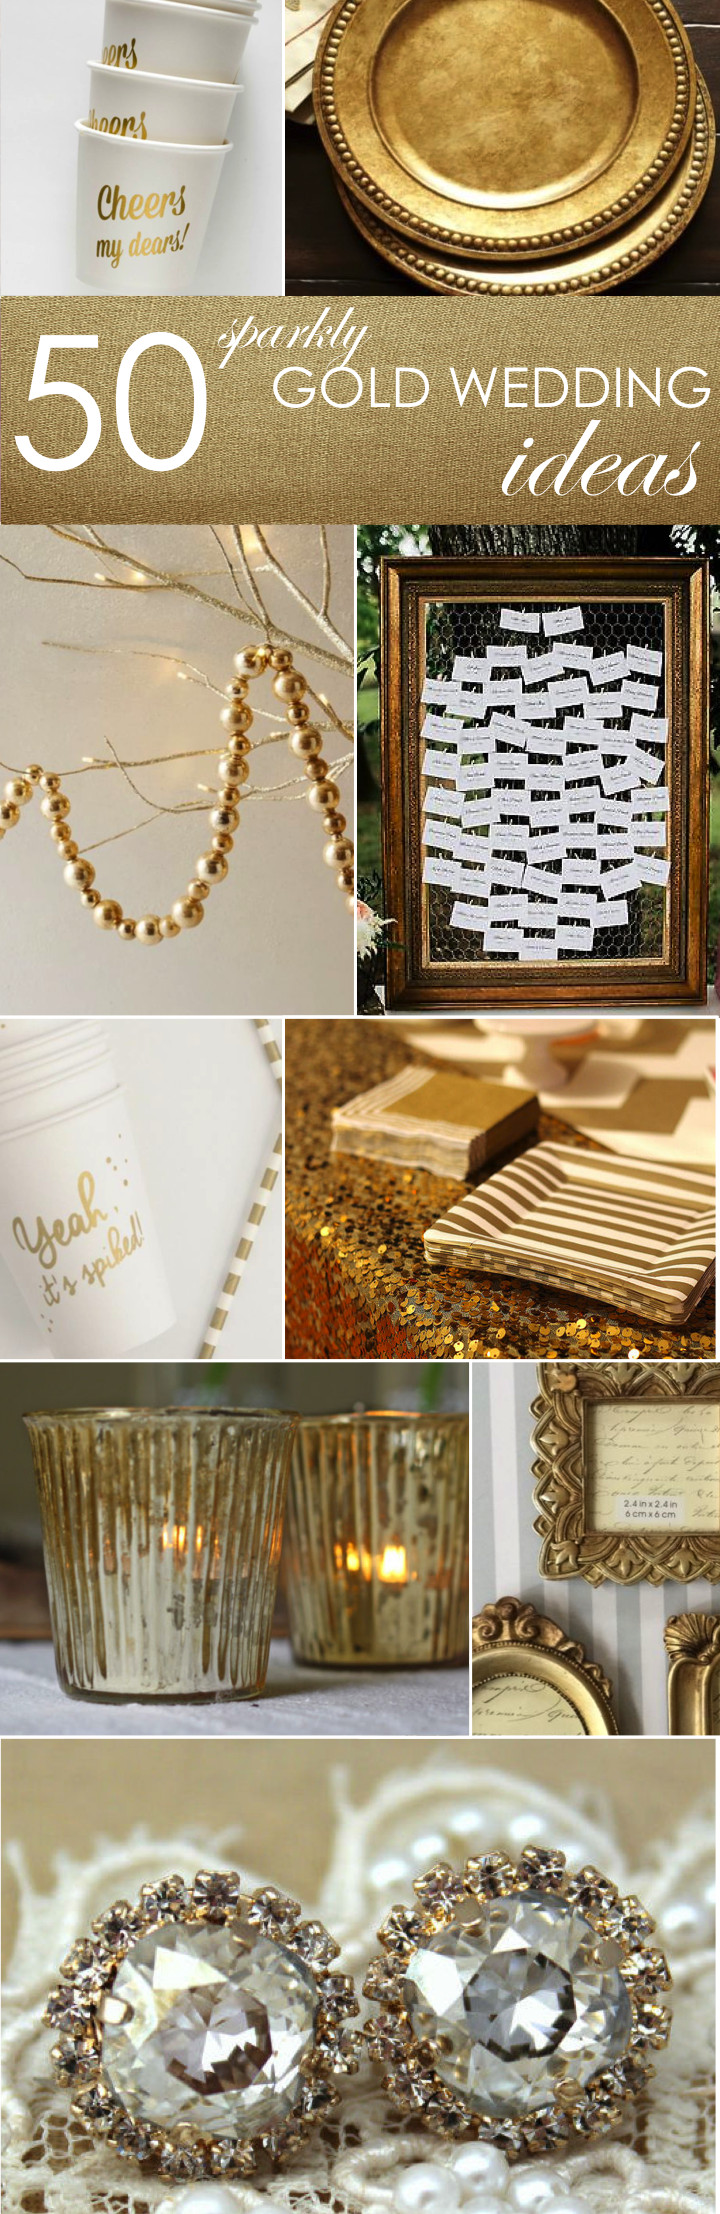 50 Wedding Anniversary Decorations
 50 Gold Ideas for Weddings Parties